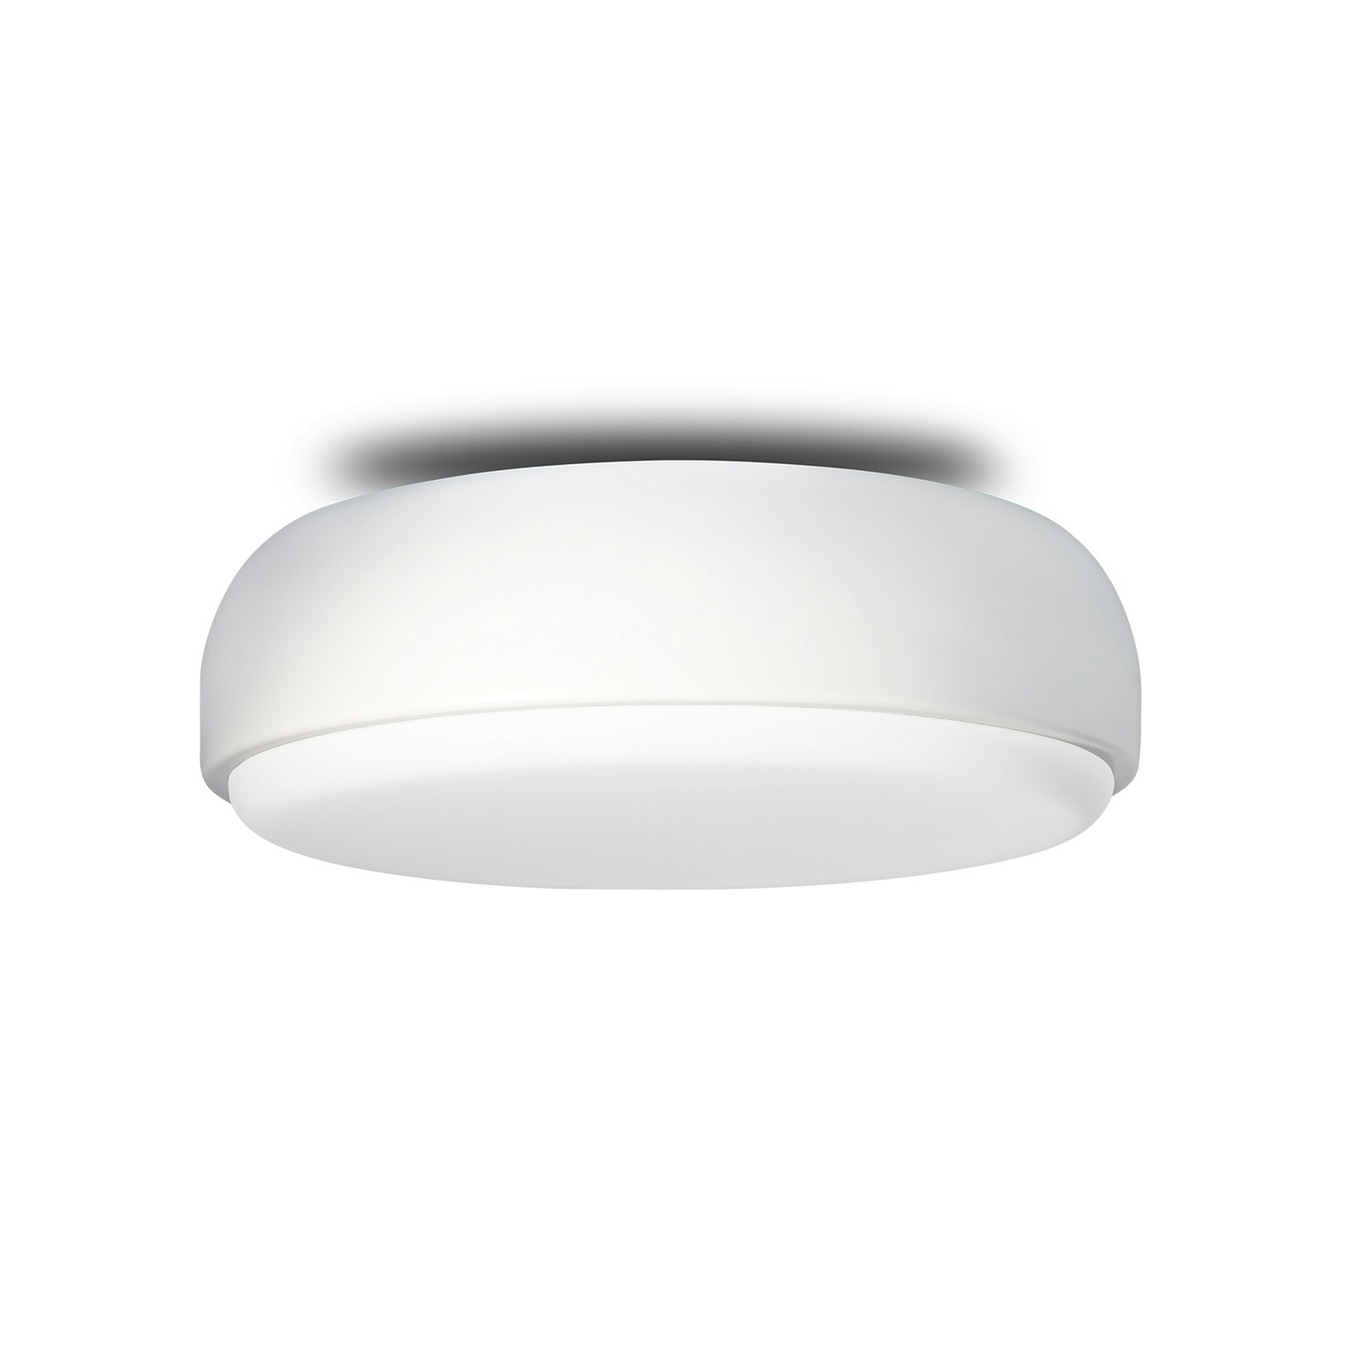 Over Me 40 Ceiling/Wall Lamp, White